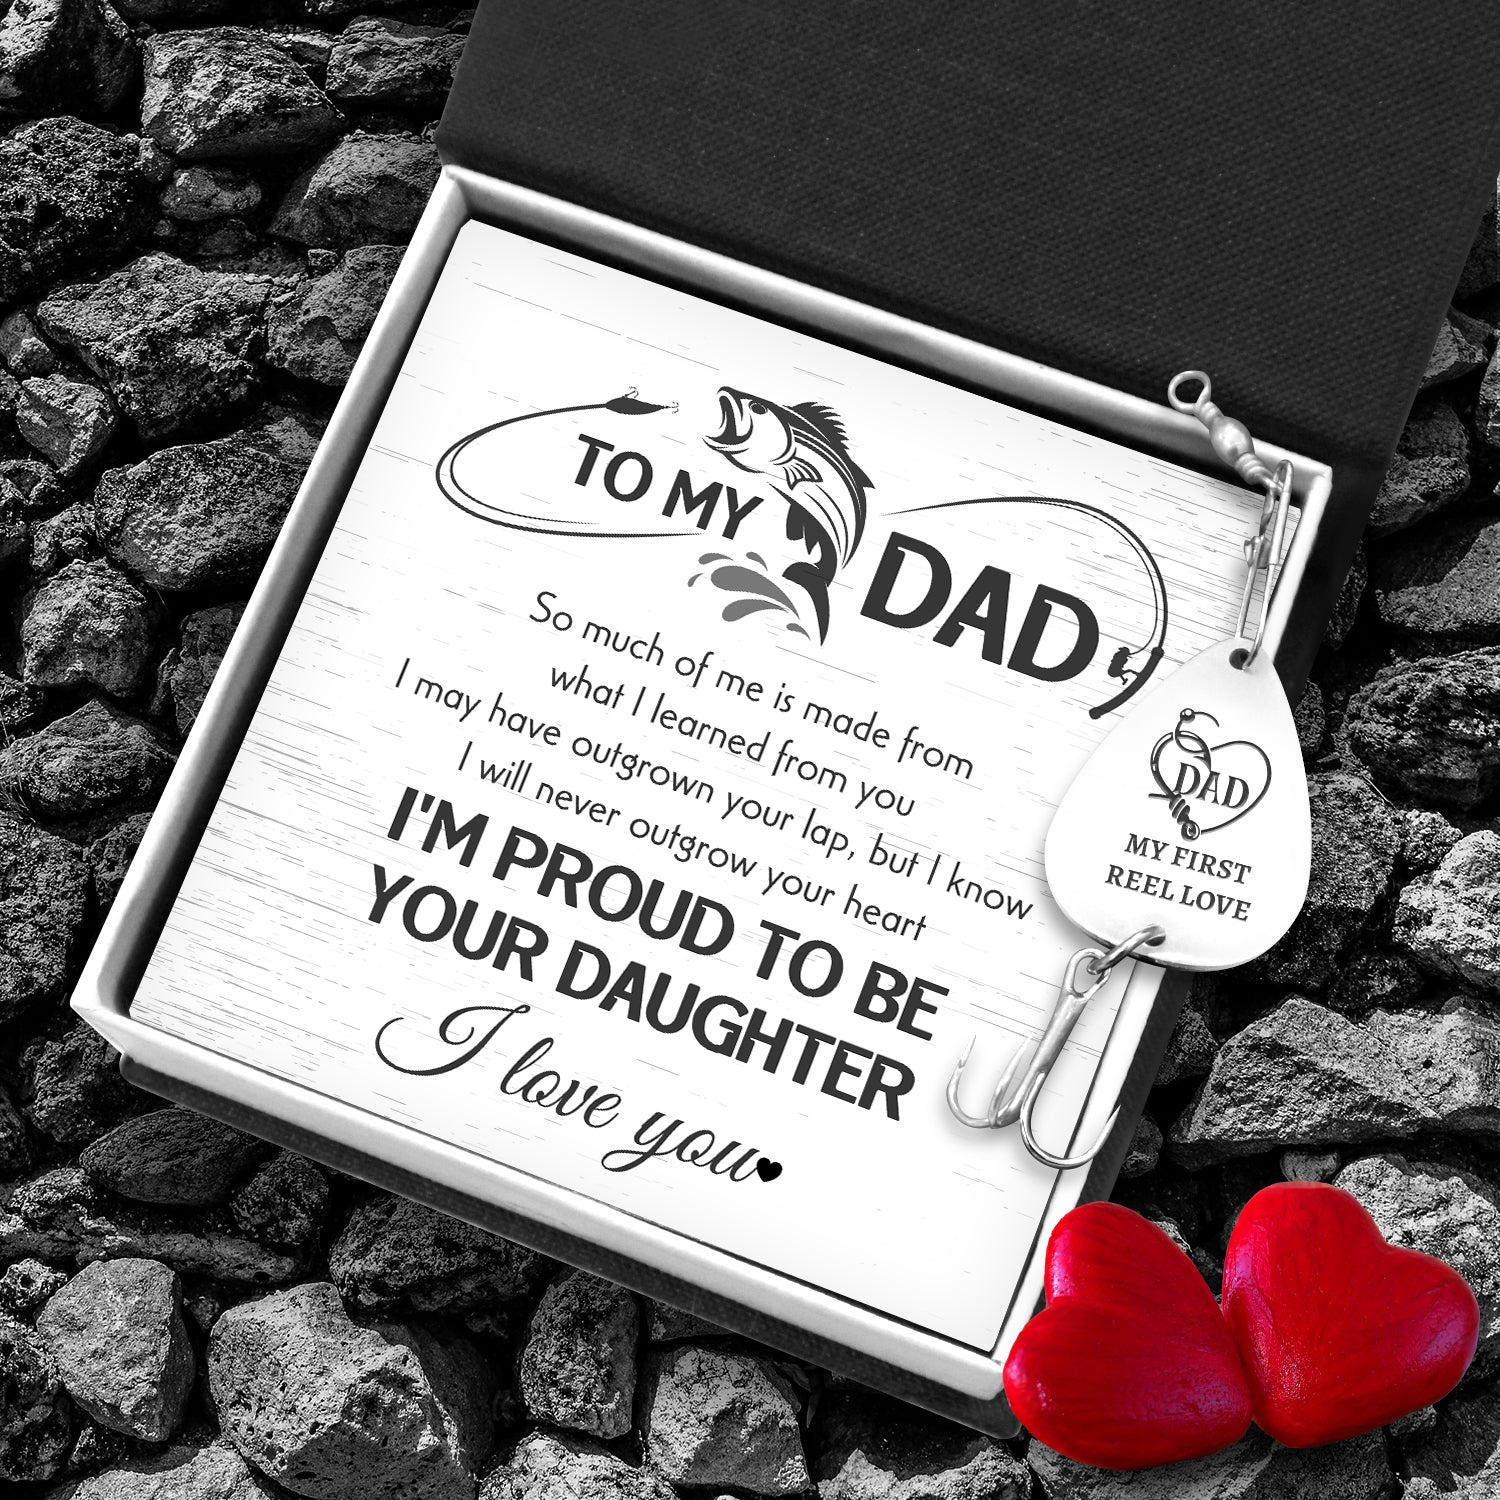 Engraved Fishing Hook - Fishing - To My Dad - I Will Never Outgrow Your Heart - Ukgfa18018